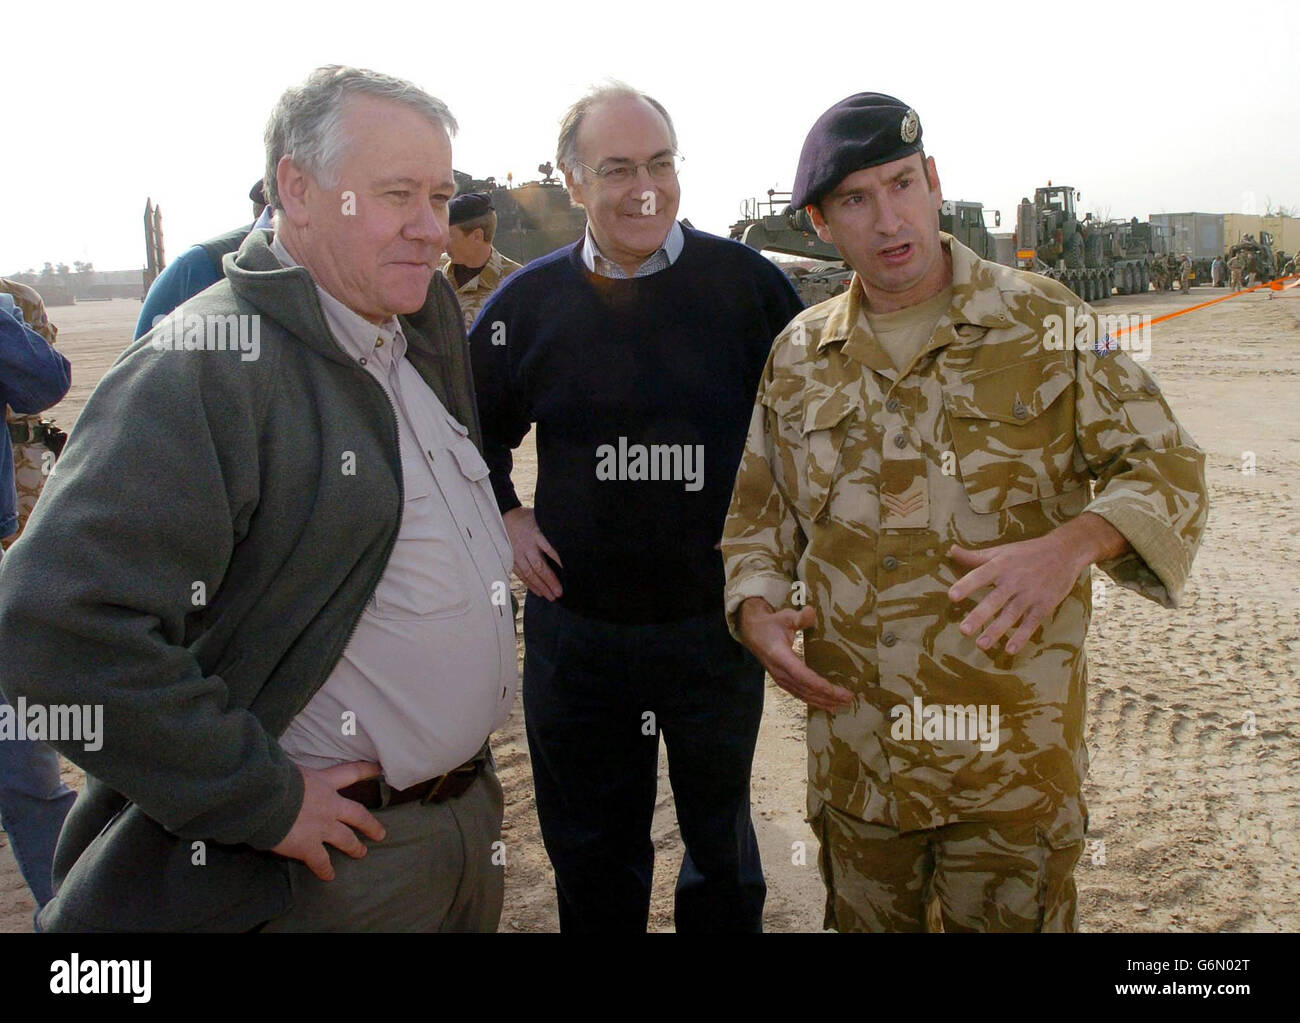 Tory leader Michael Howard (centre) and Armed Forces Minister Adam Ingram meet with Sgt. John Marley from Horden Co Durham of 15th Field Sqd. Royal Engineers at Shaibah Logistic Base. Mr Howard was joining Mr Ingram and shadow defence secretary Nicholas Soames for the last leg of a tour to raise troops' morale. Stock Photo